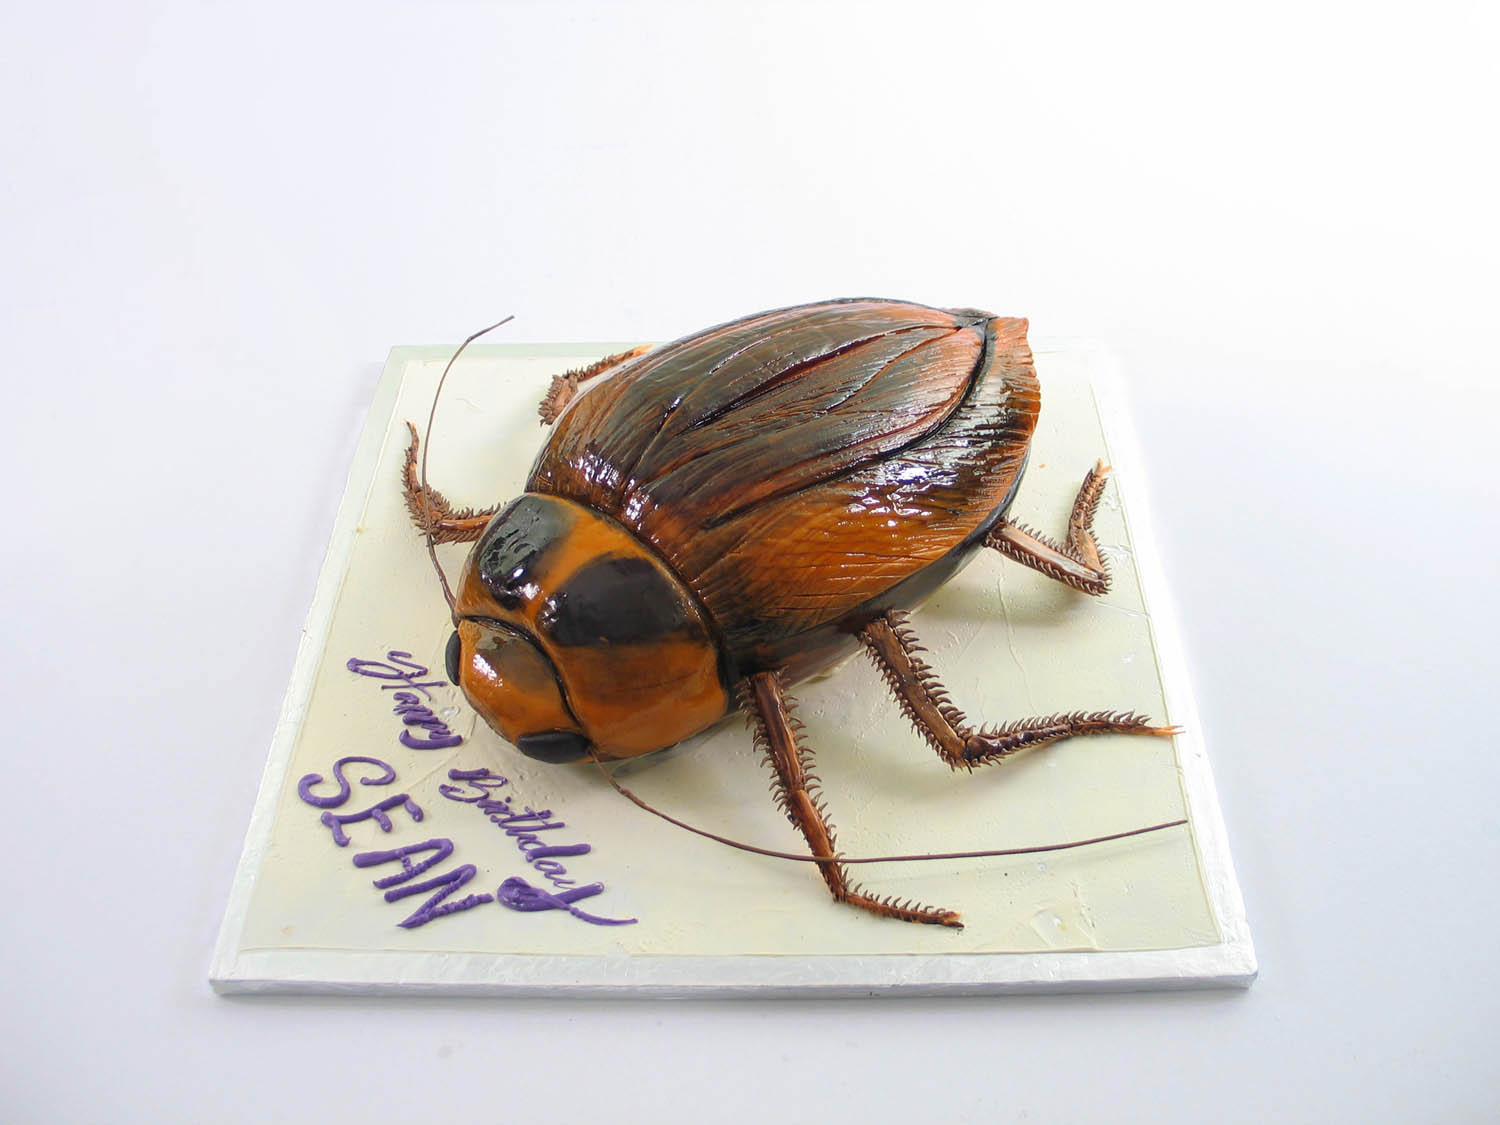 How to Make A COCKROACH CAKE! - YouTube